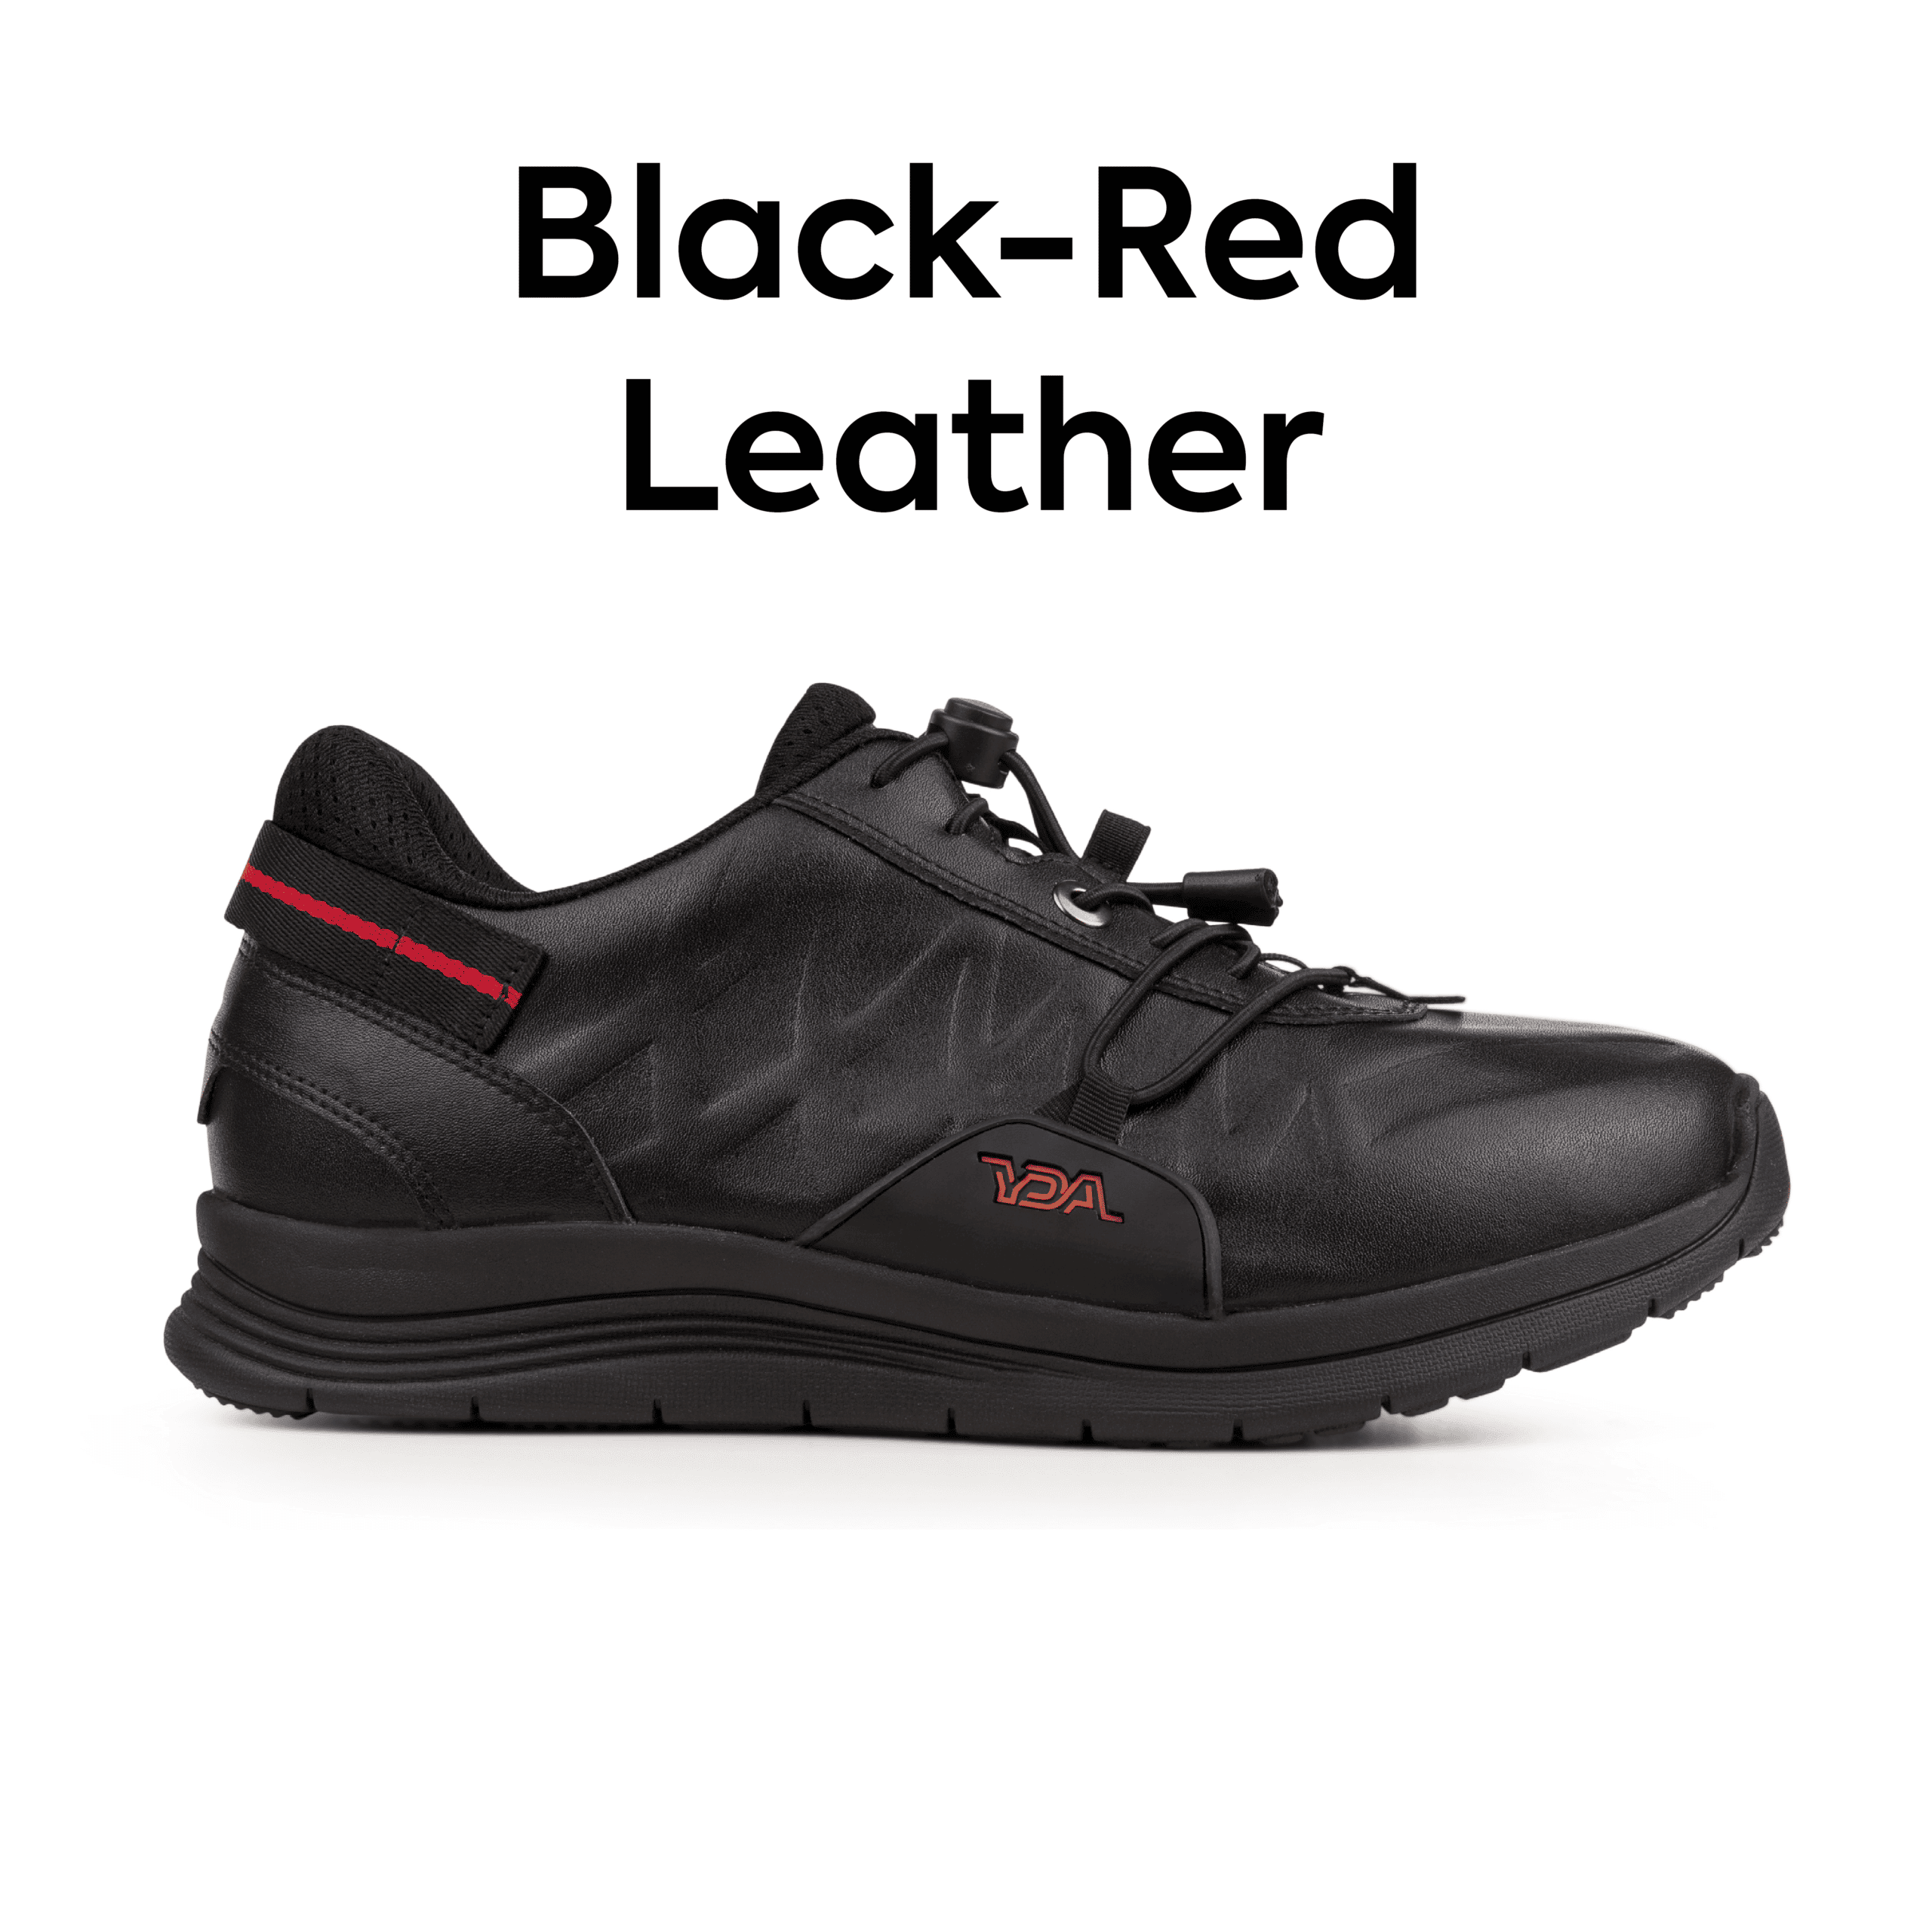 20220401_all YDA shoes_black-red leather